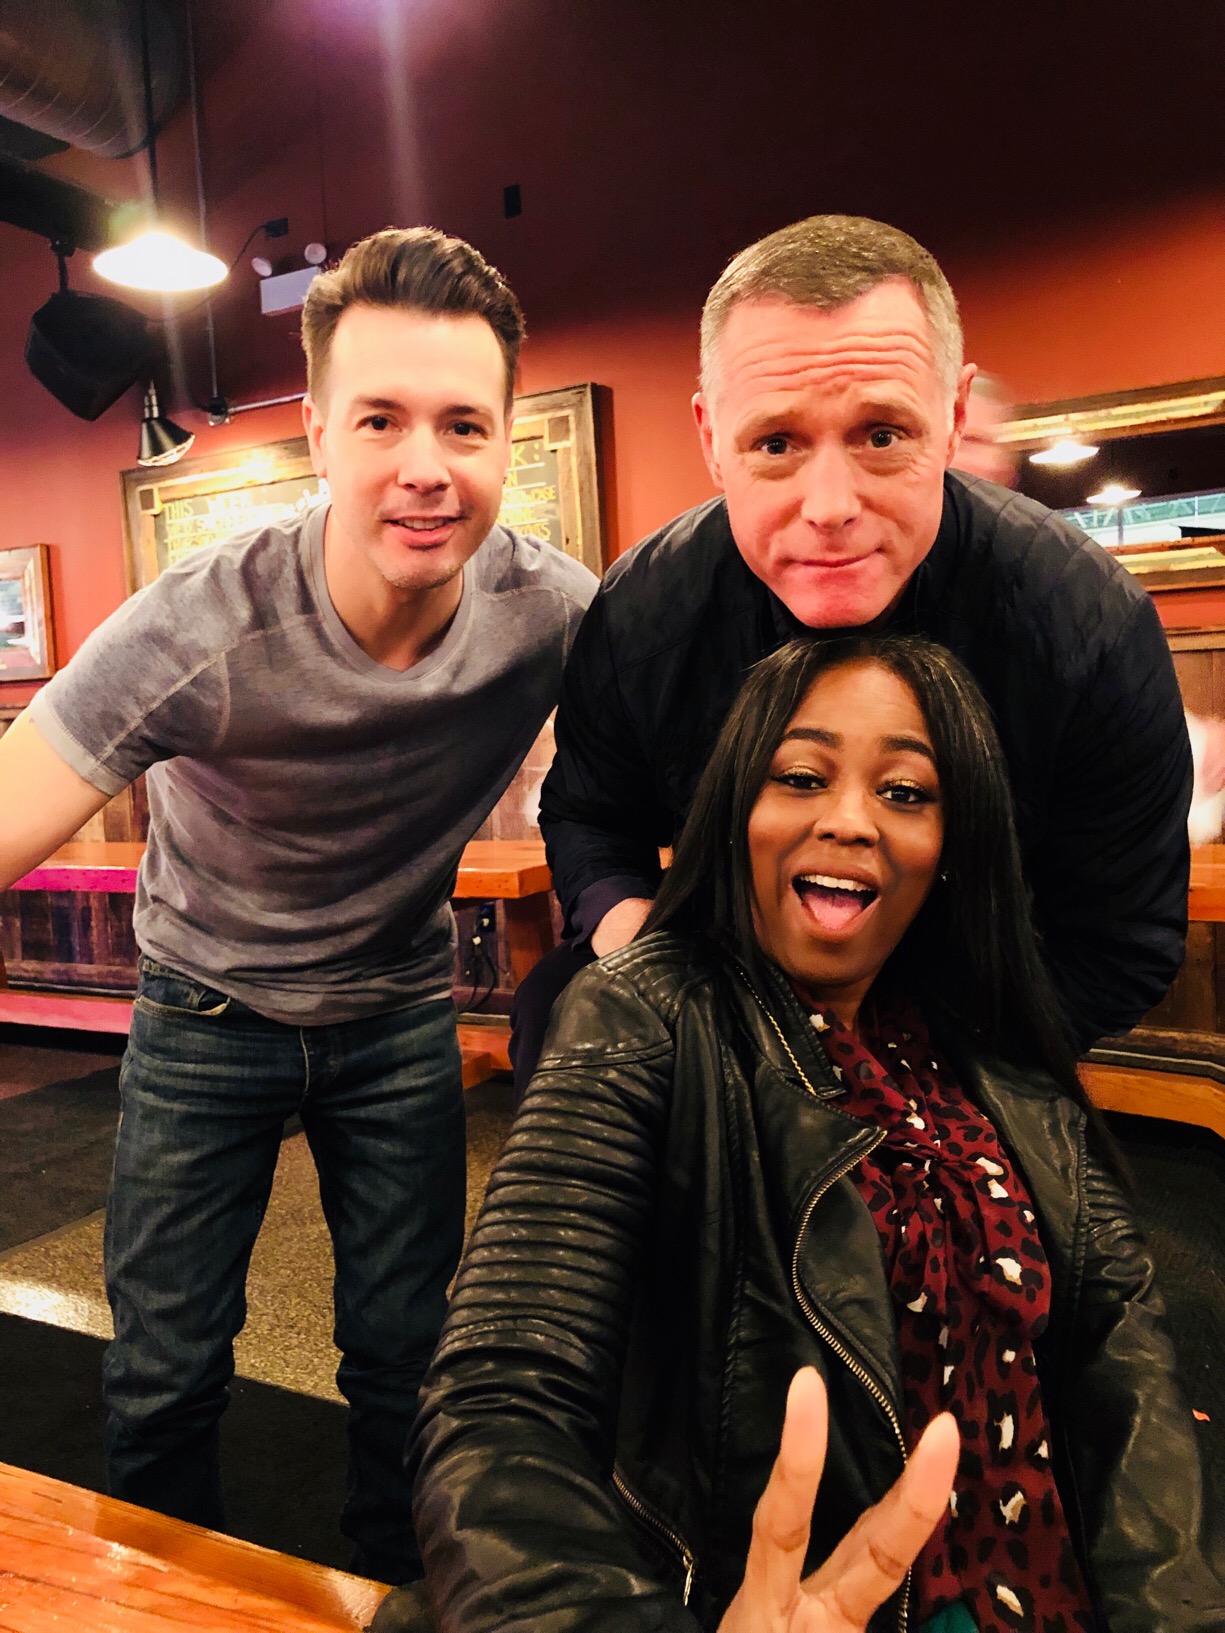 Round Table Discussion With Actors Jason Beghe And Jon Seda From NBC’s Chicago P.D.